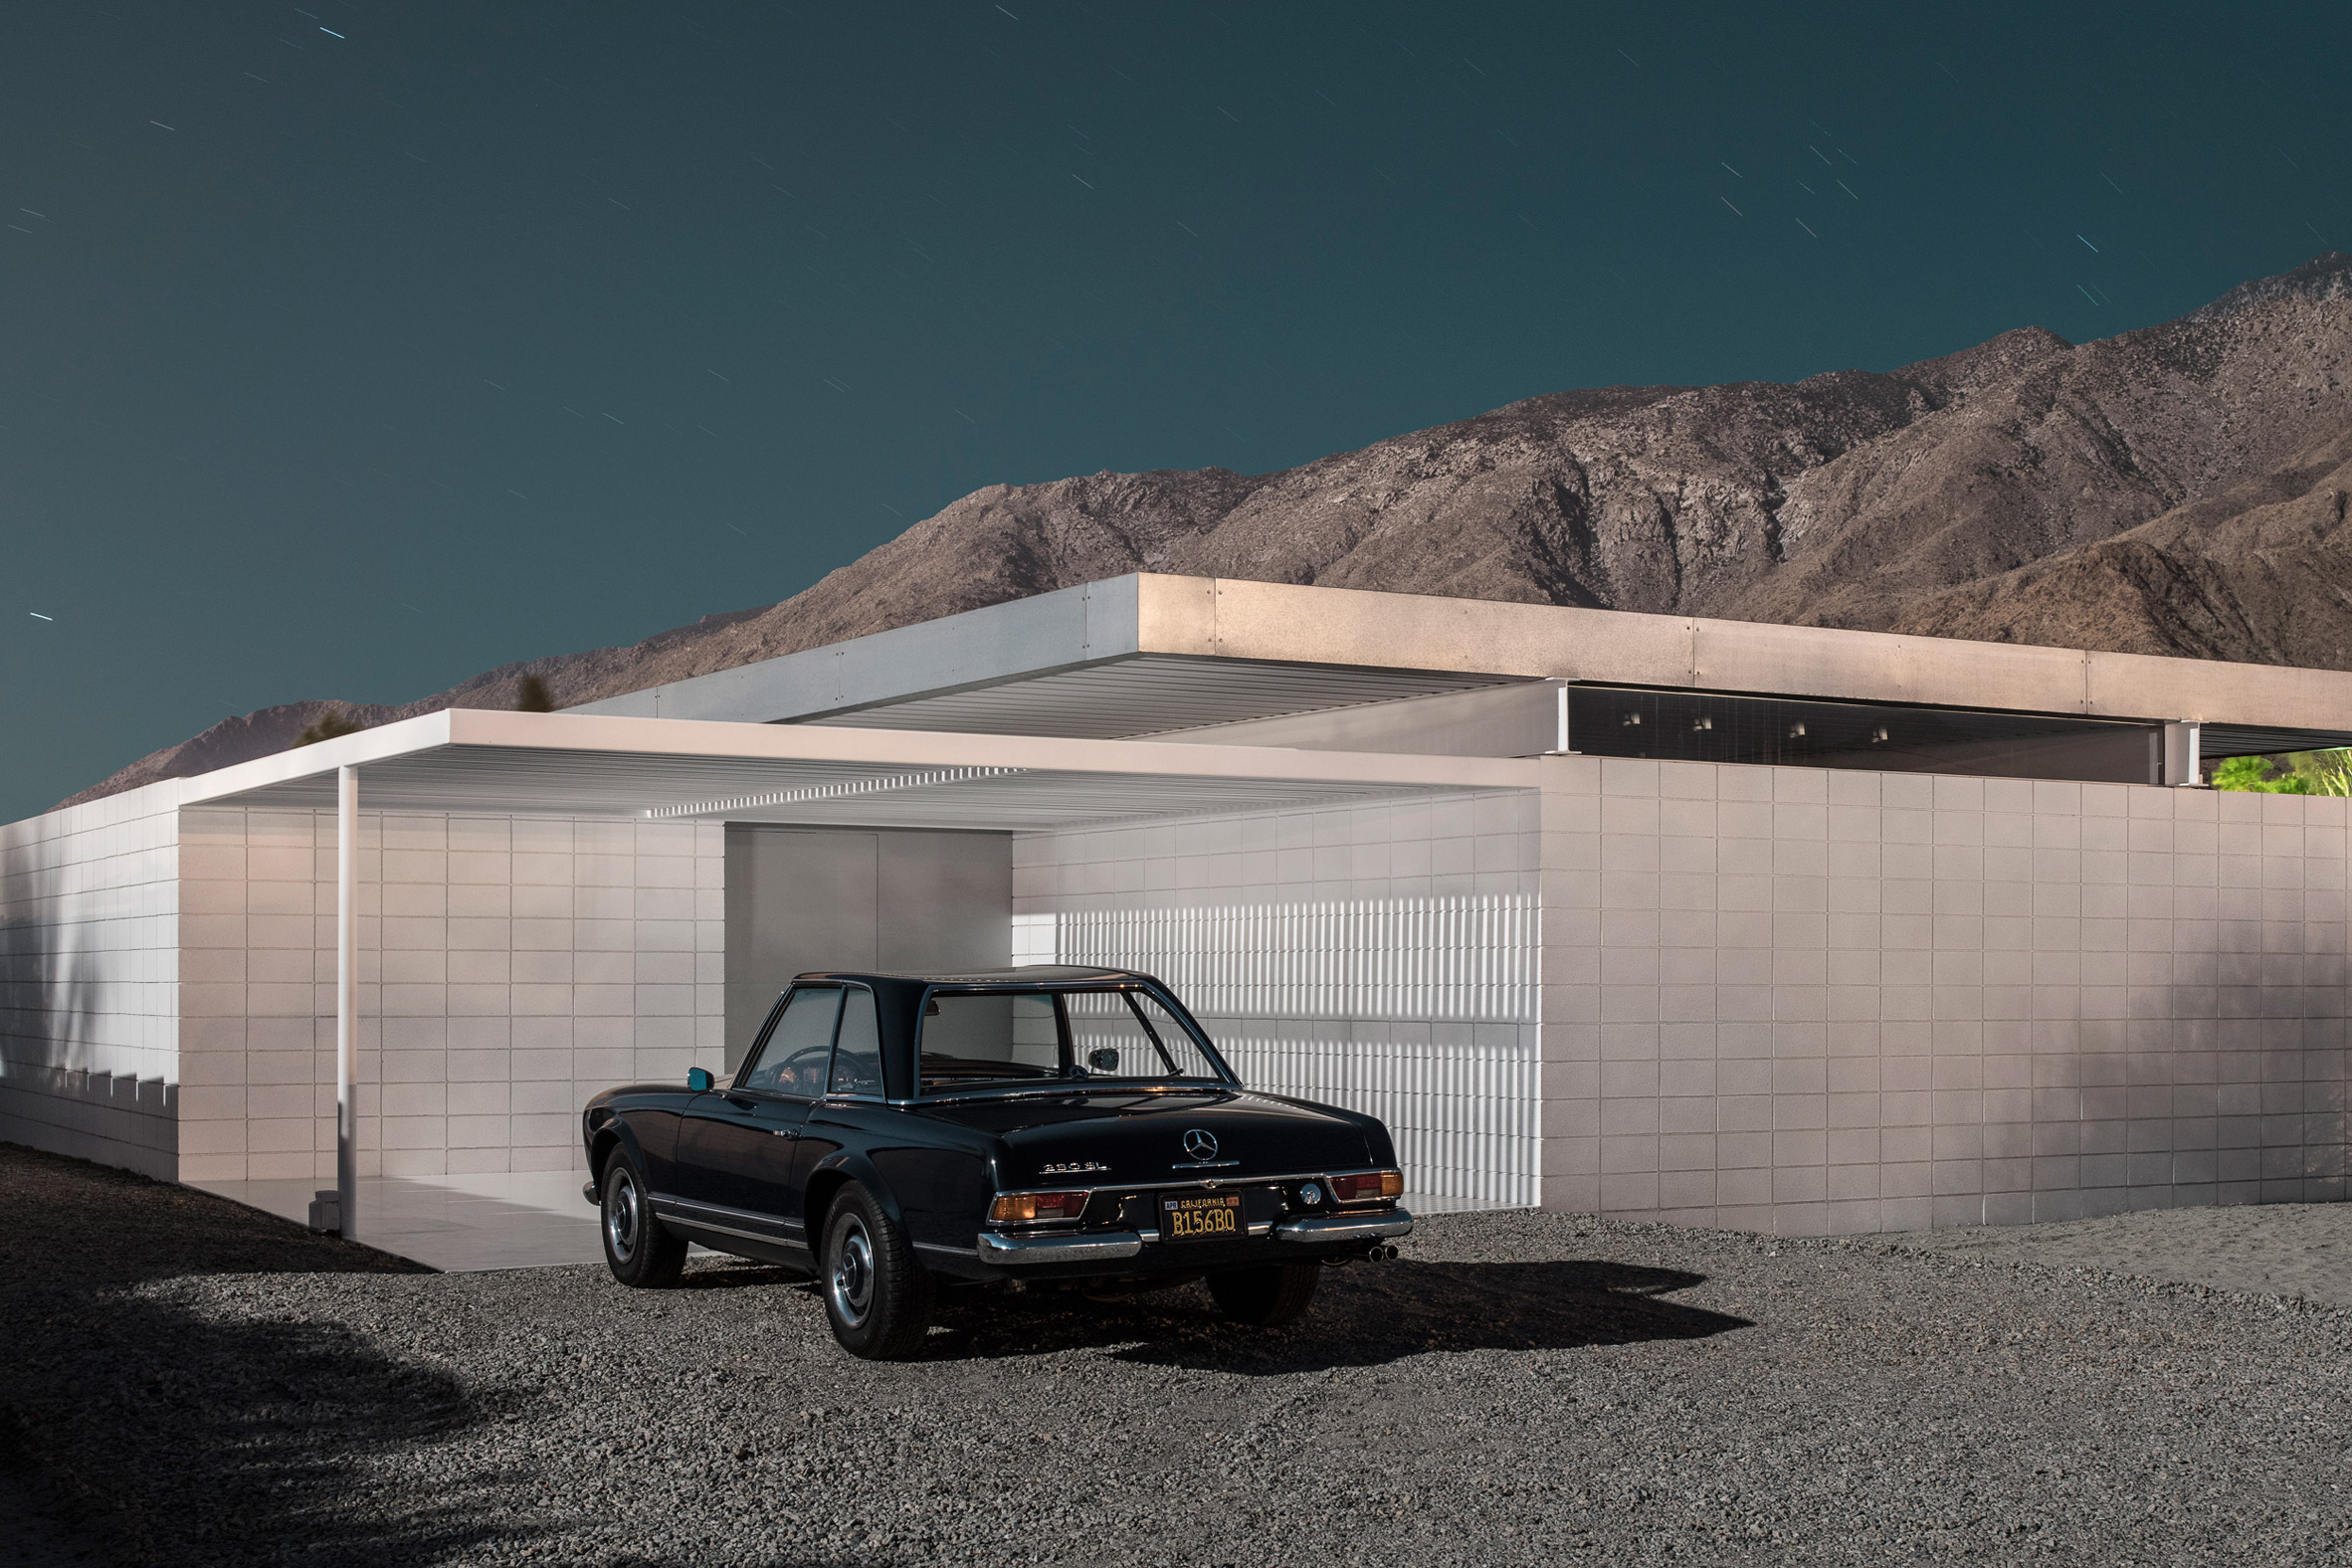 Modernist house in Palm Springs, photographed by Tom Blachford